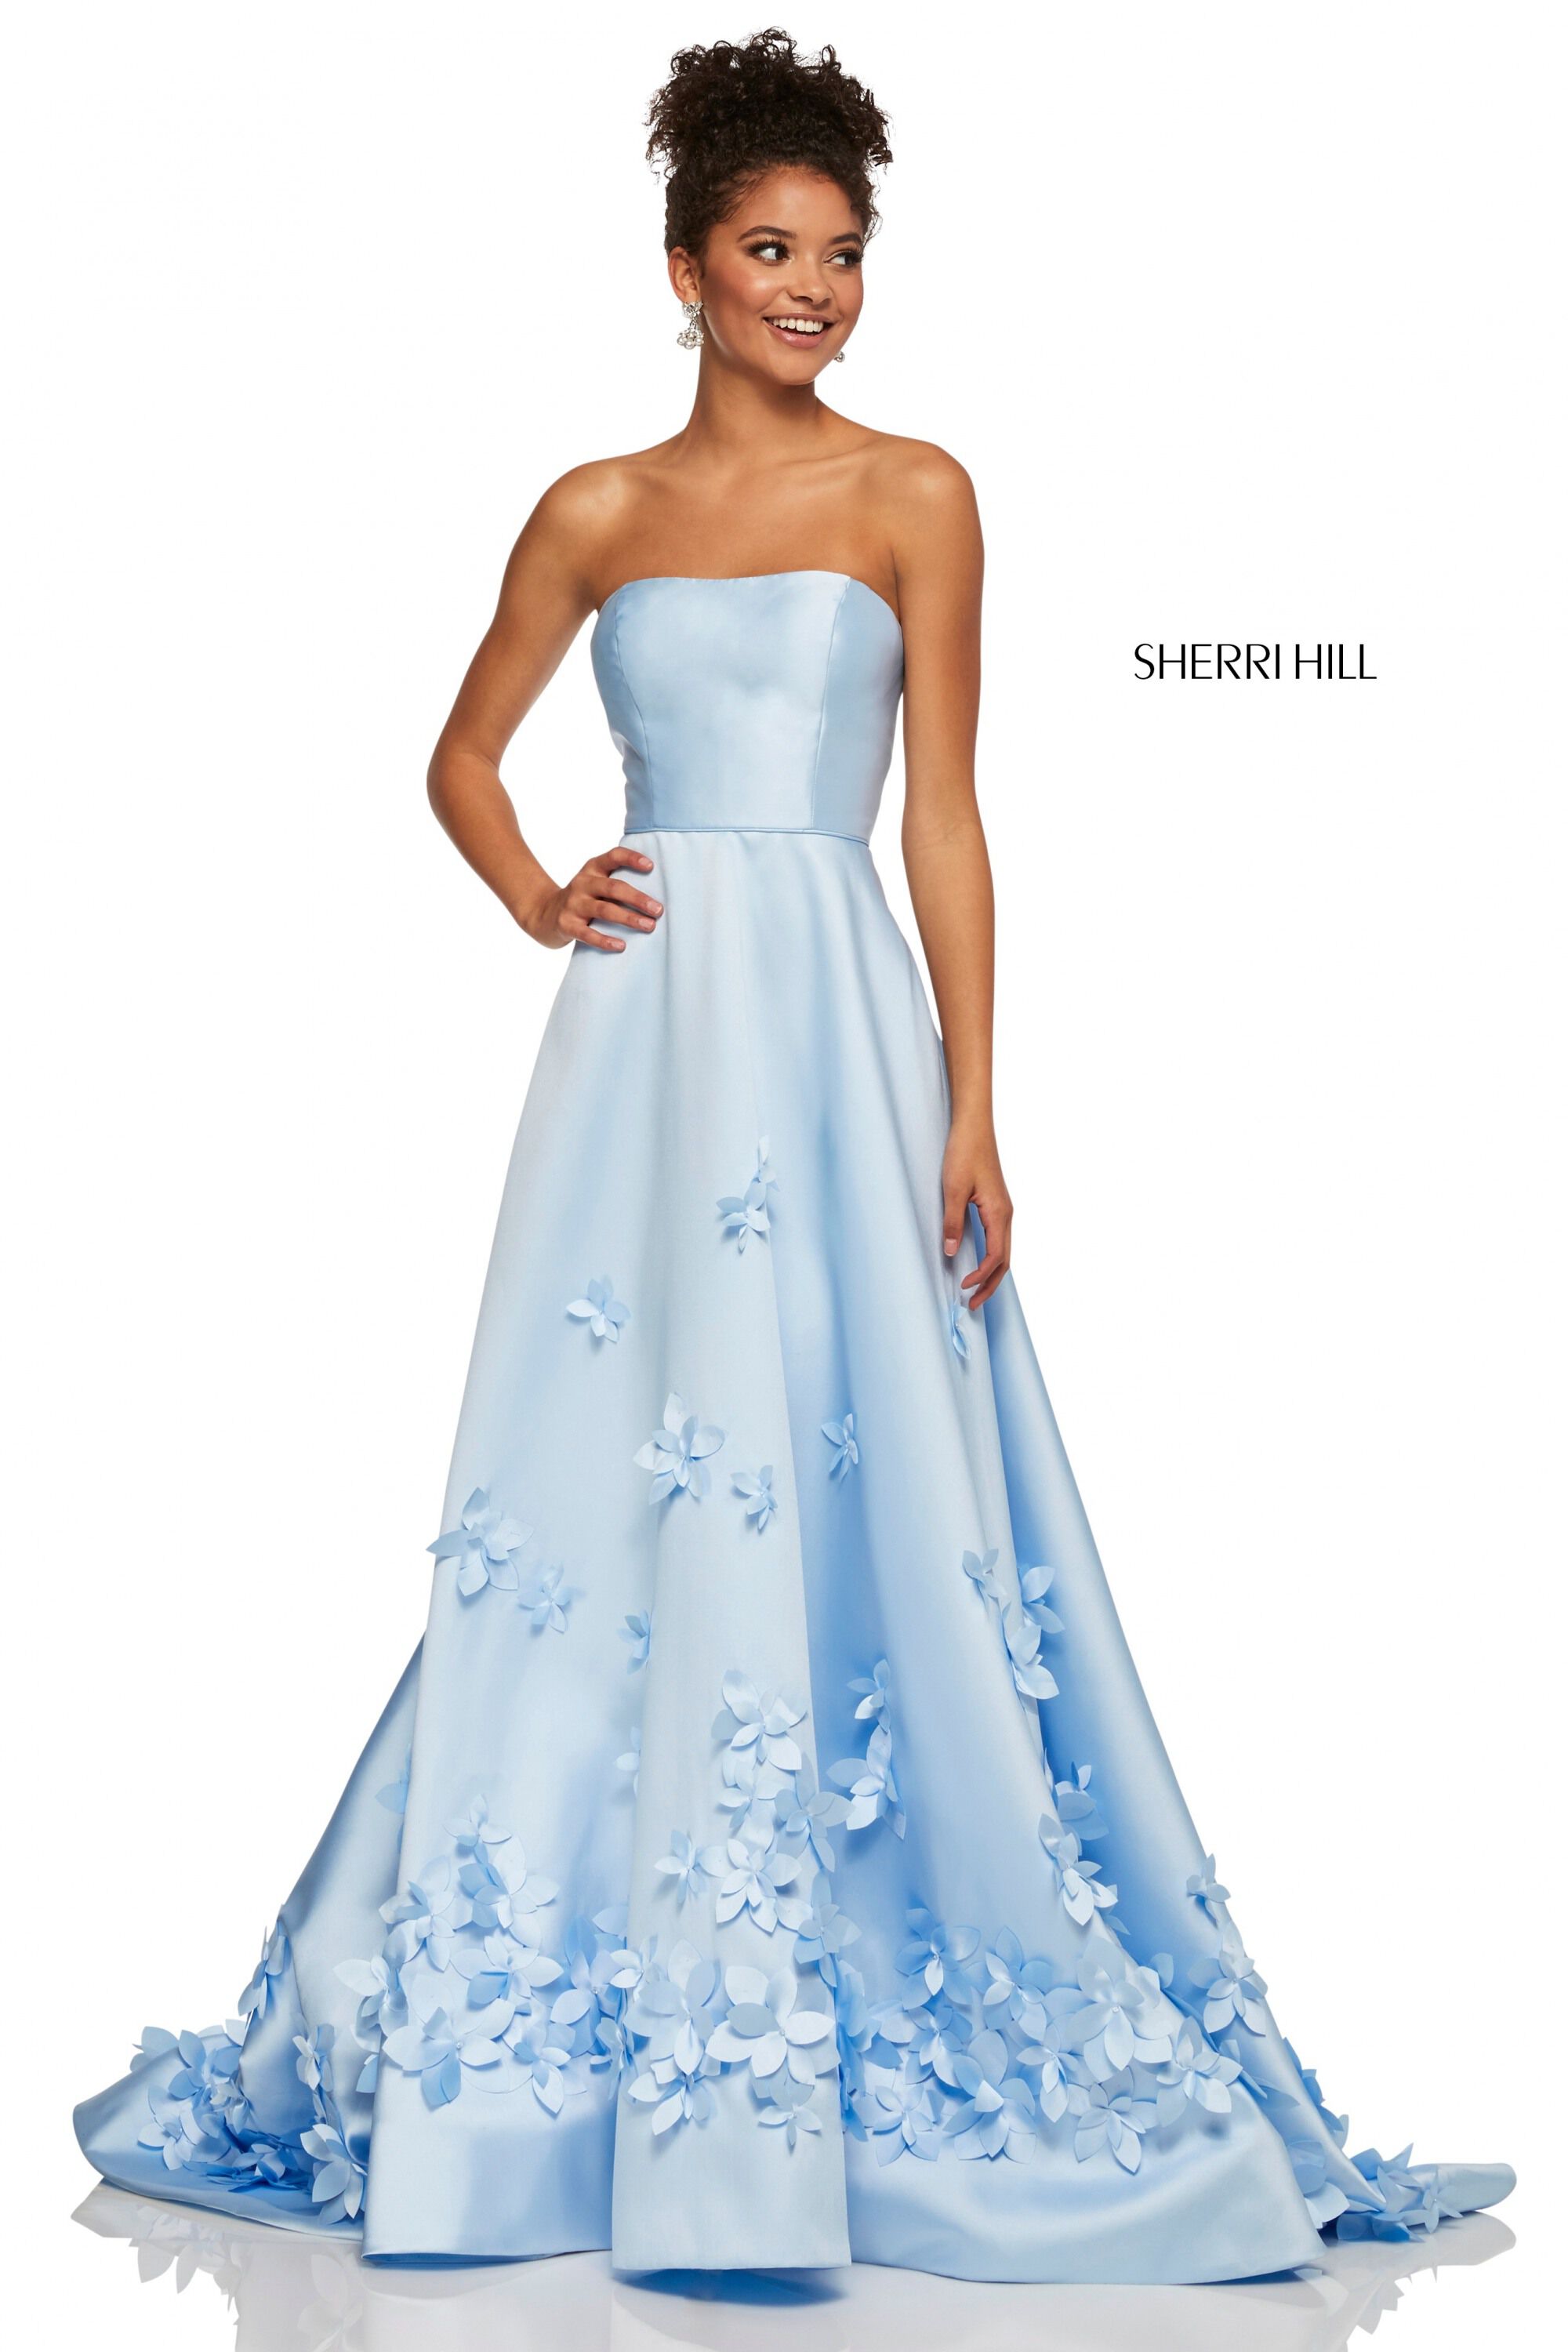 style № 52582 designed by SherriHill